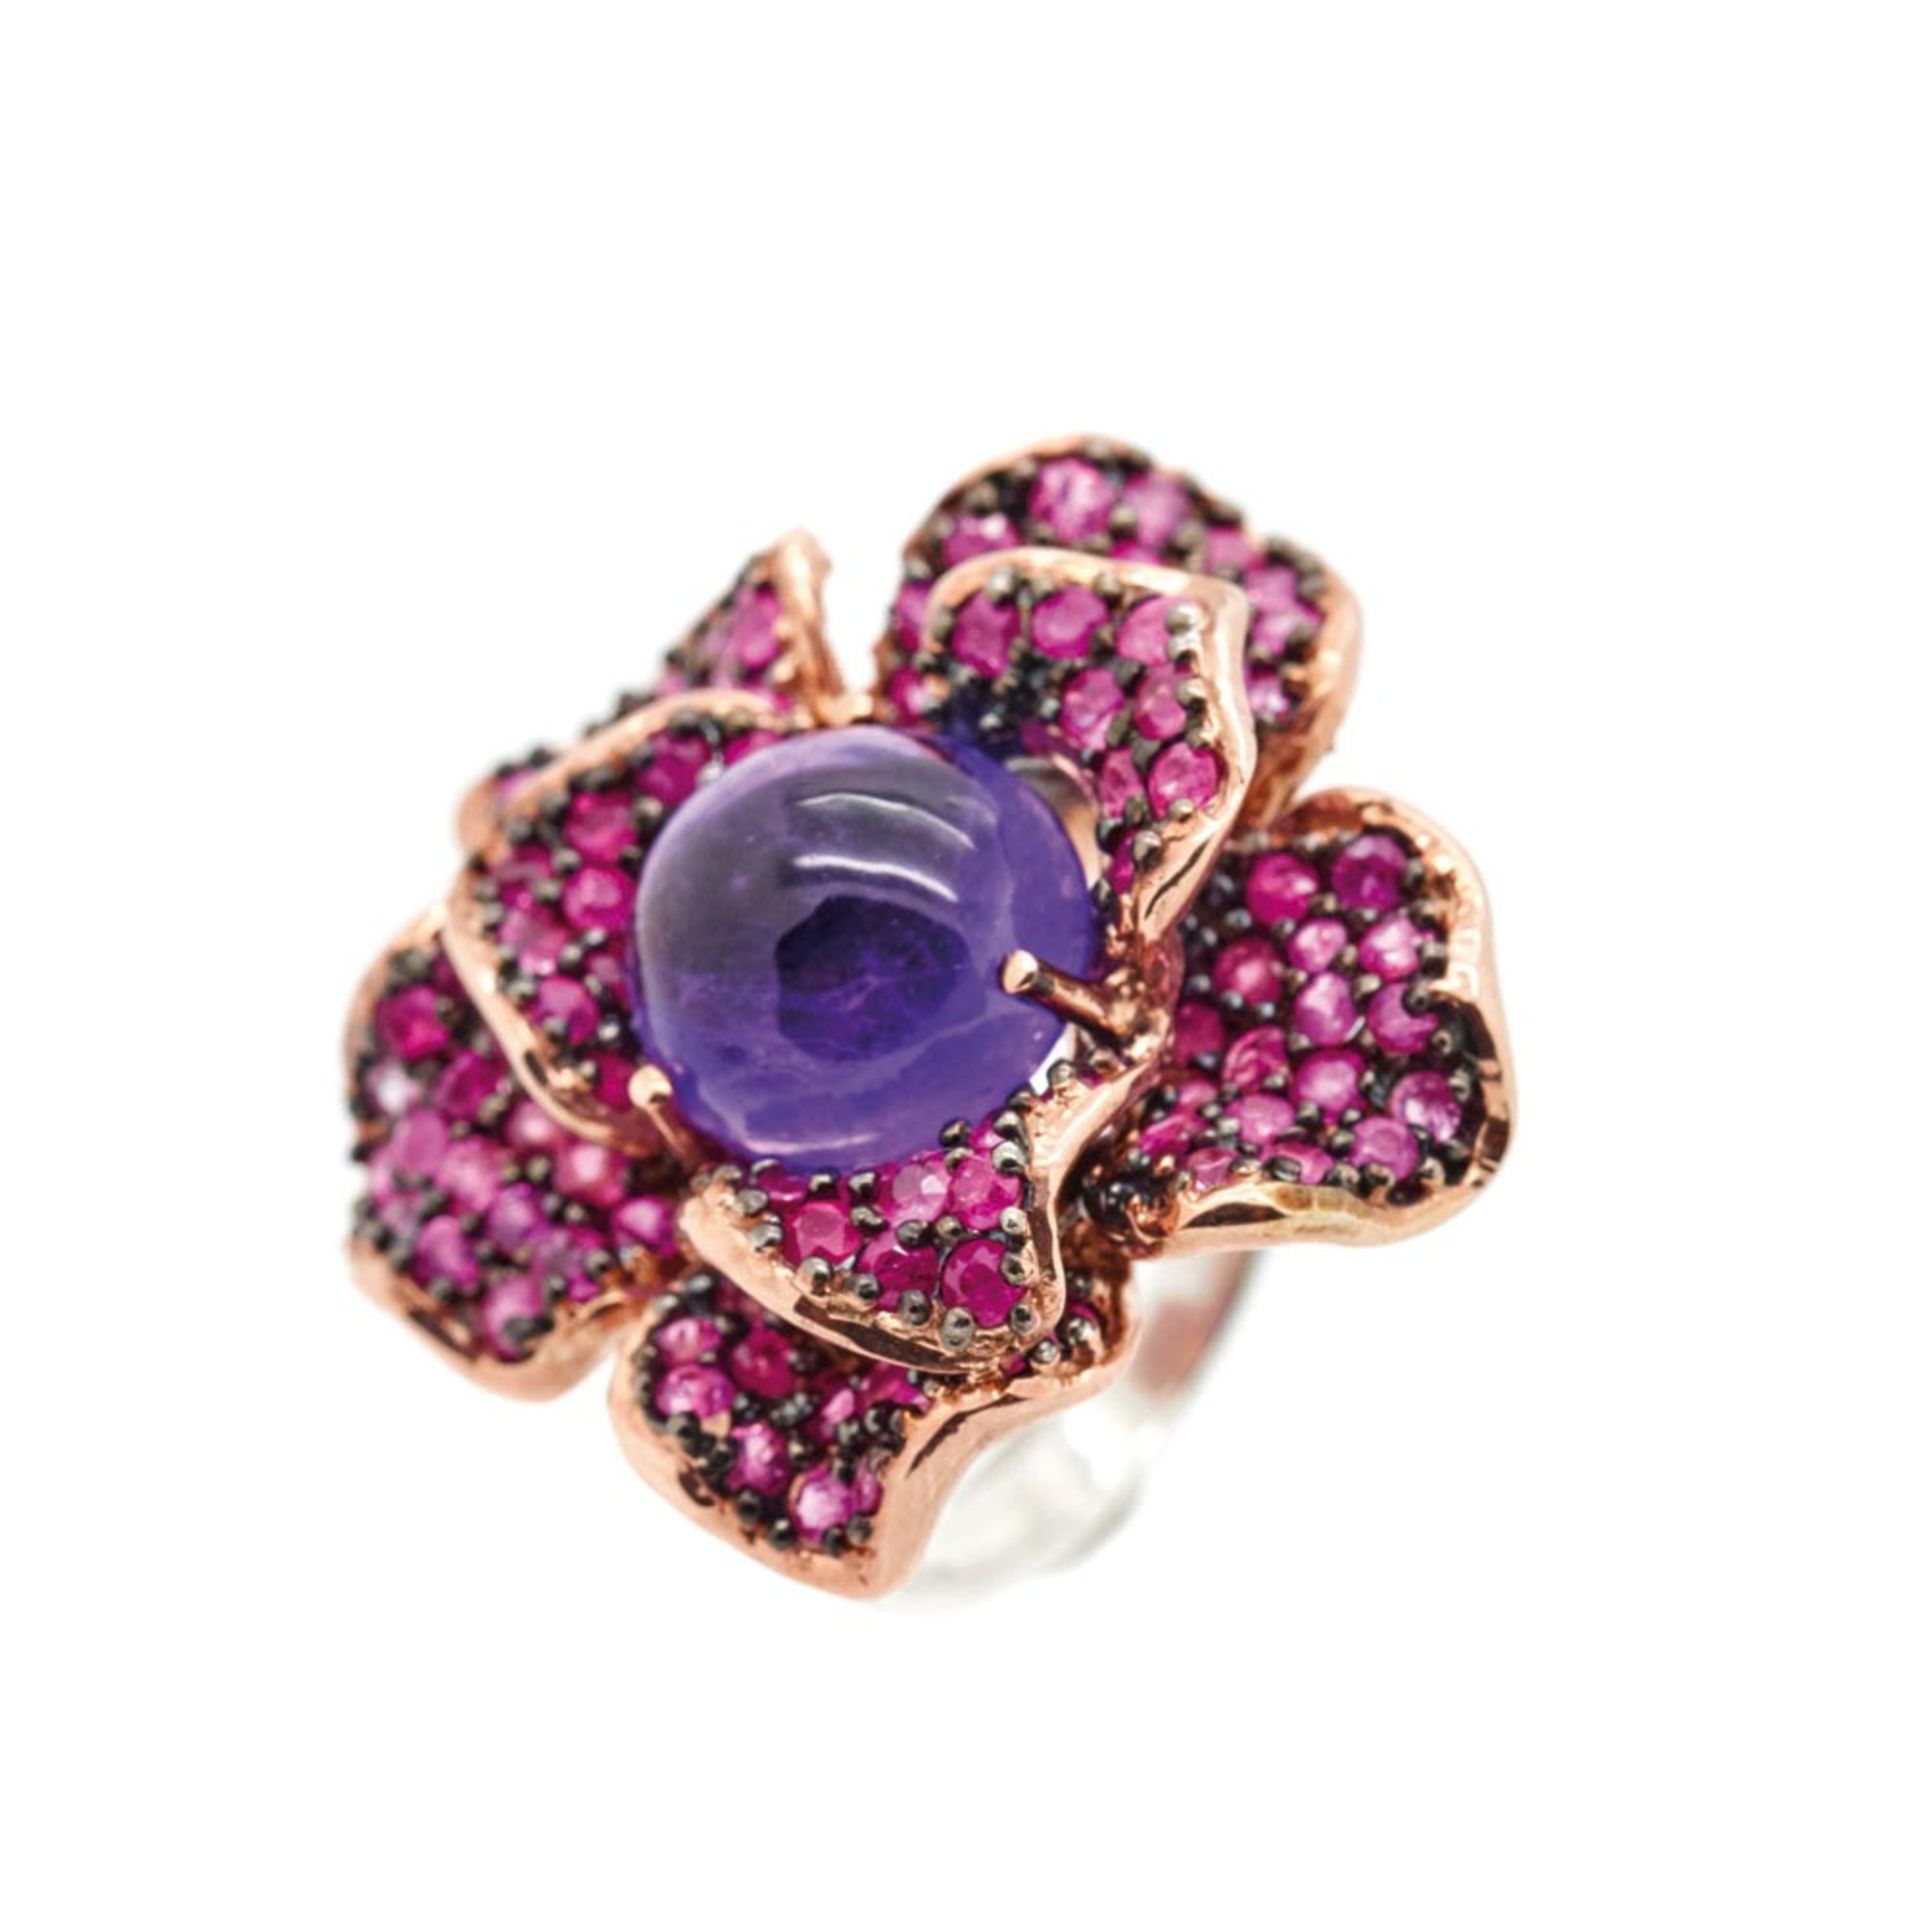 Silver, pink gold plated, amethyst and pink sapphires ring